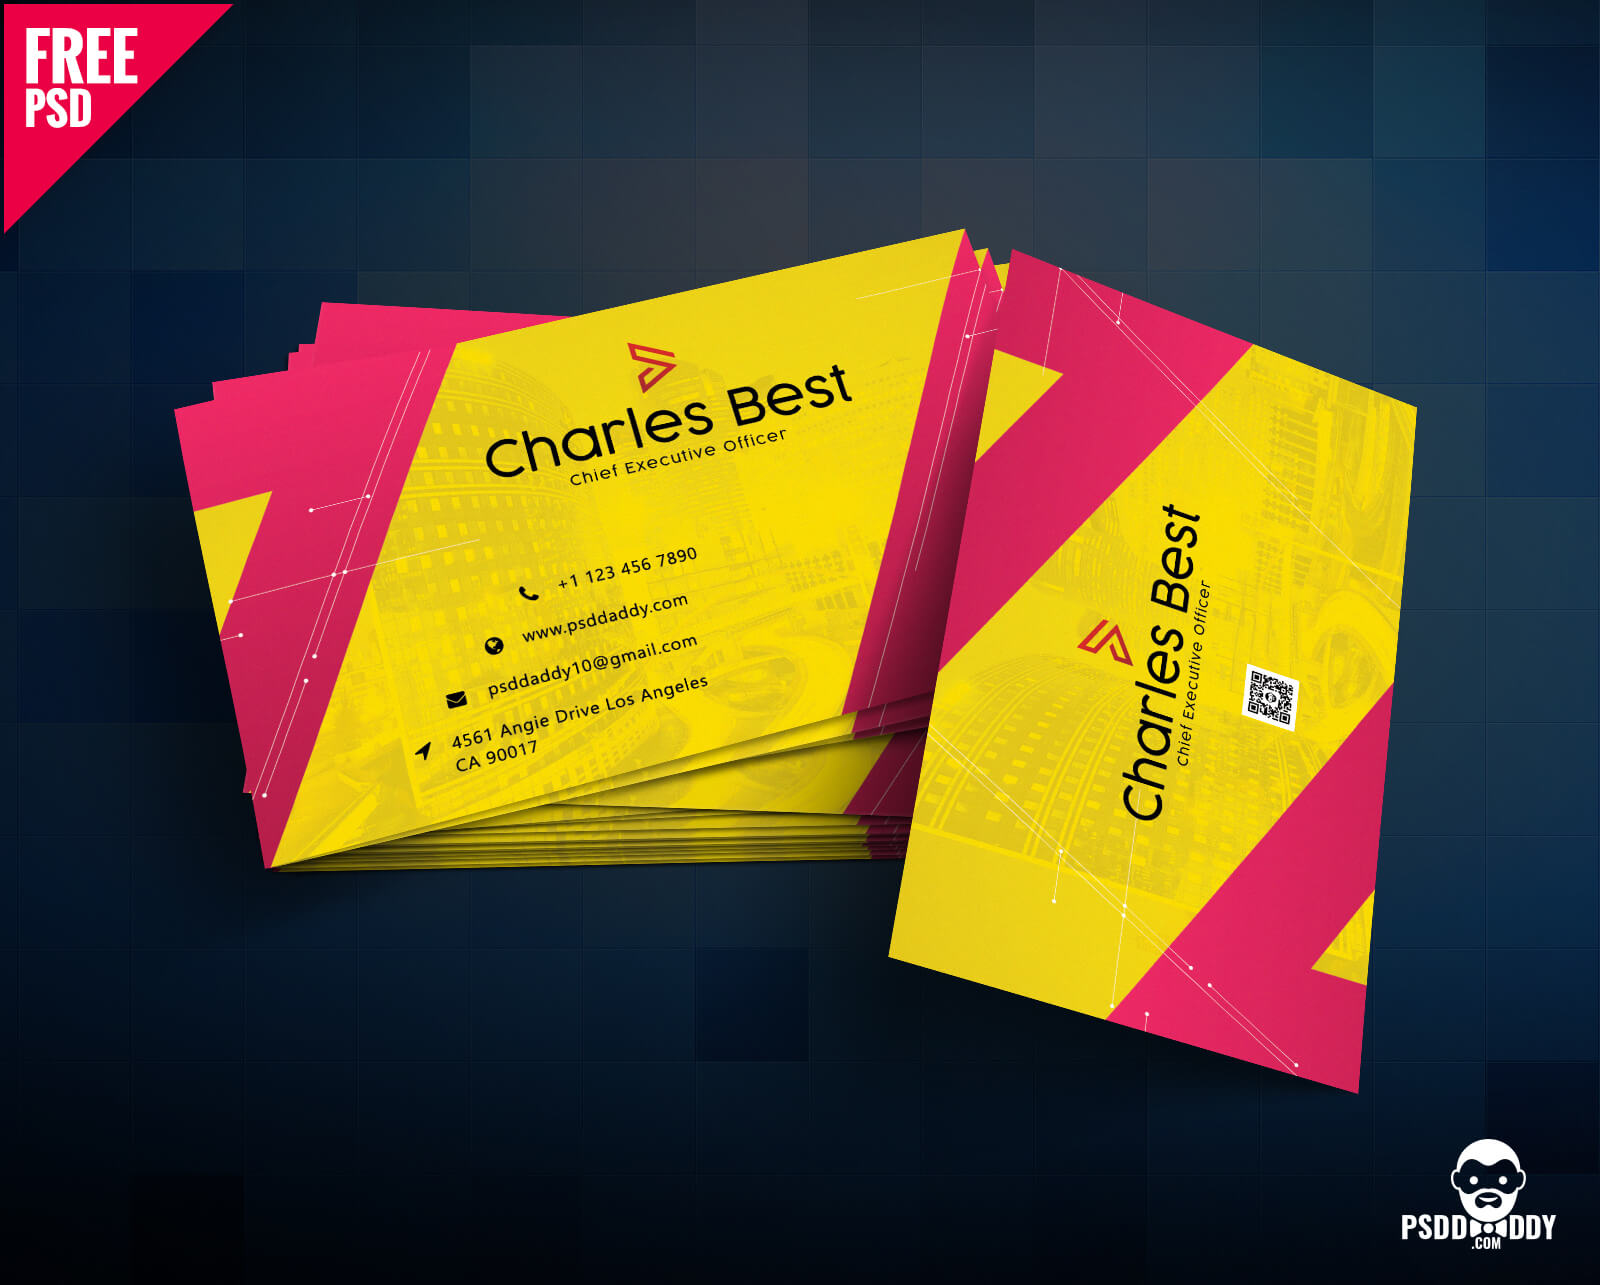 Download] Creative Business Card Free Psd | Psddaddy With Photoshop Cs6 Business Card Template